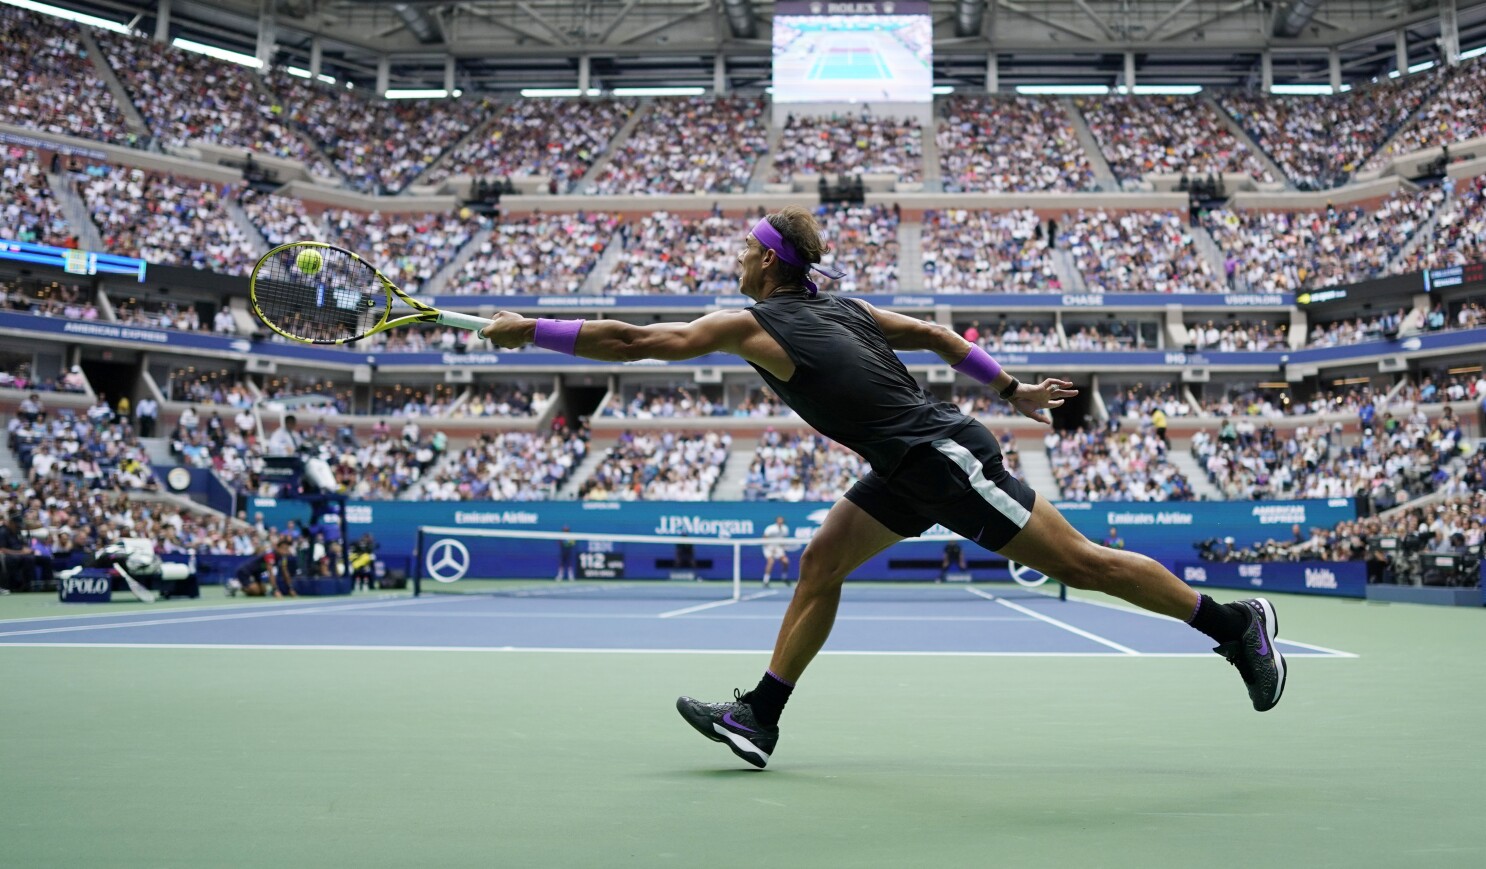 U S Open Tennis Without Fans Will Be A Strange Experience Los Angeles Times